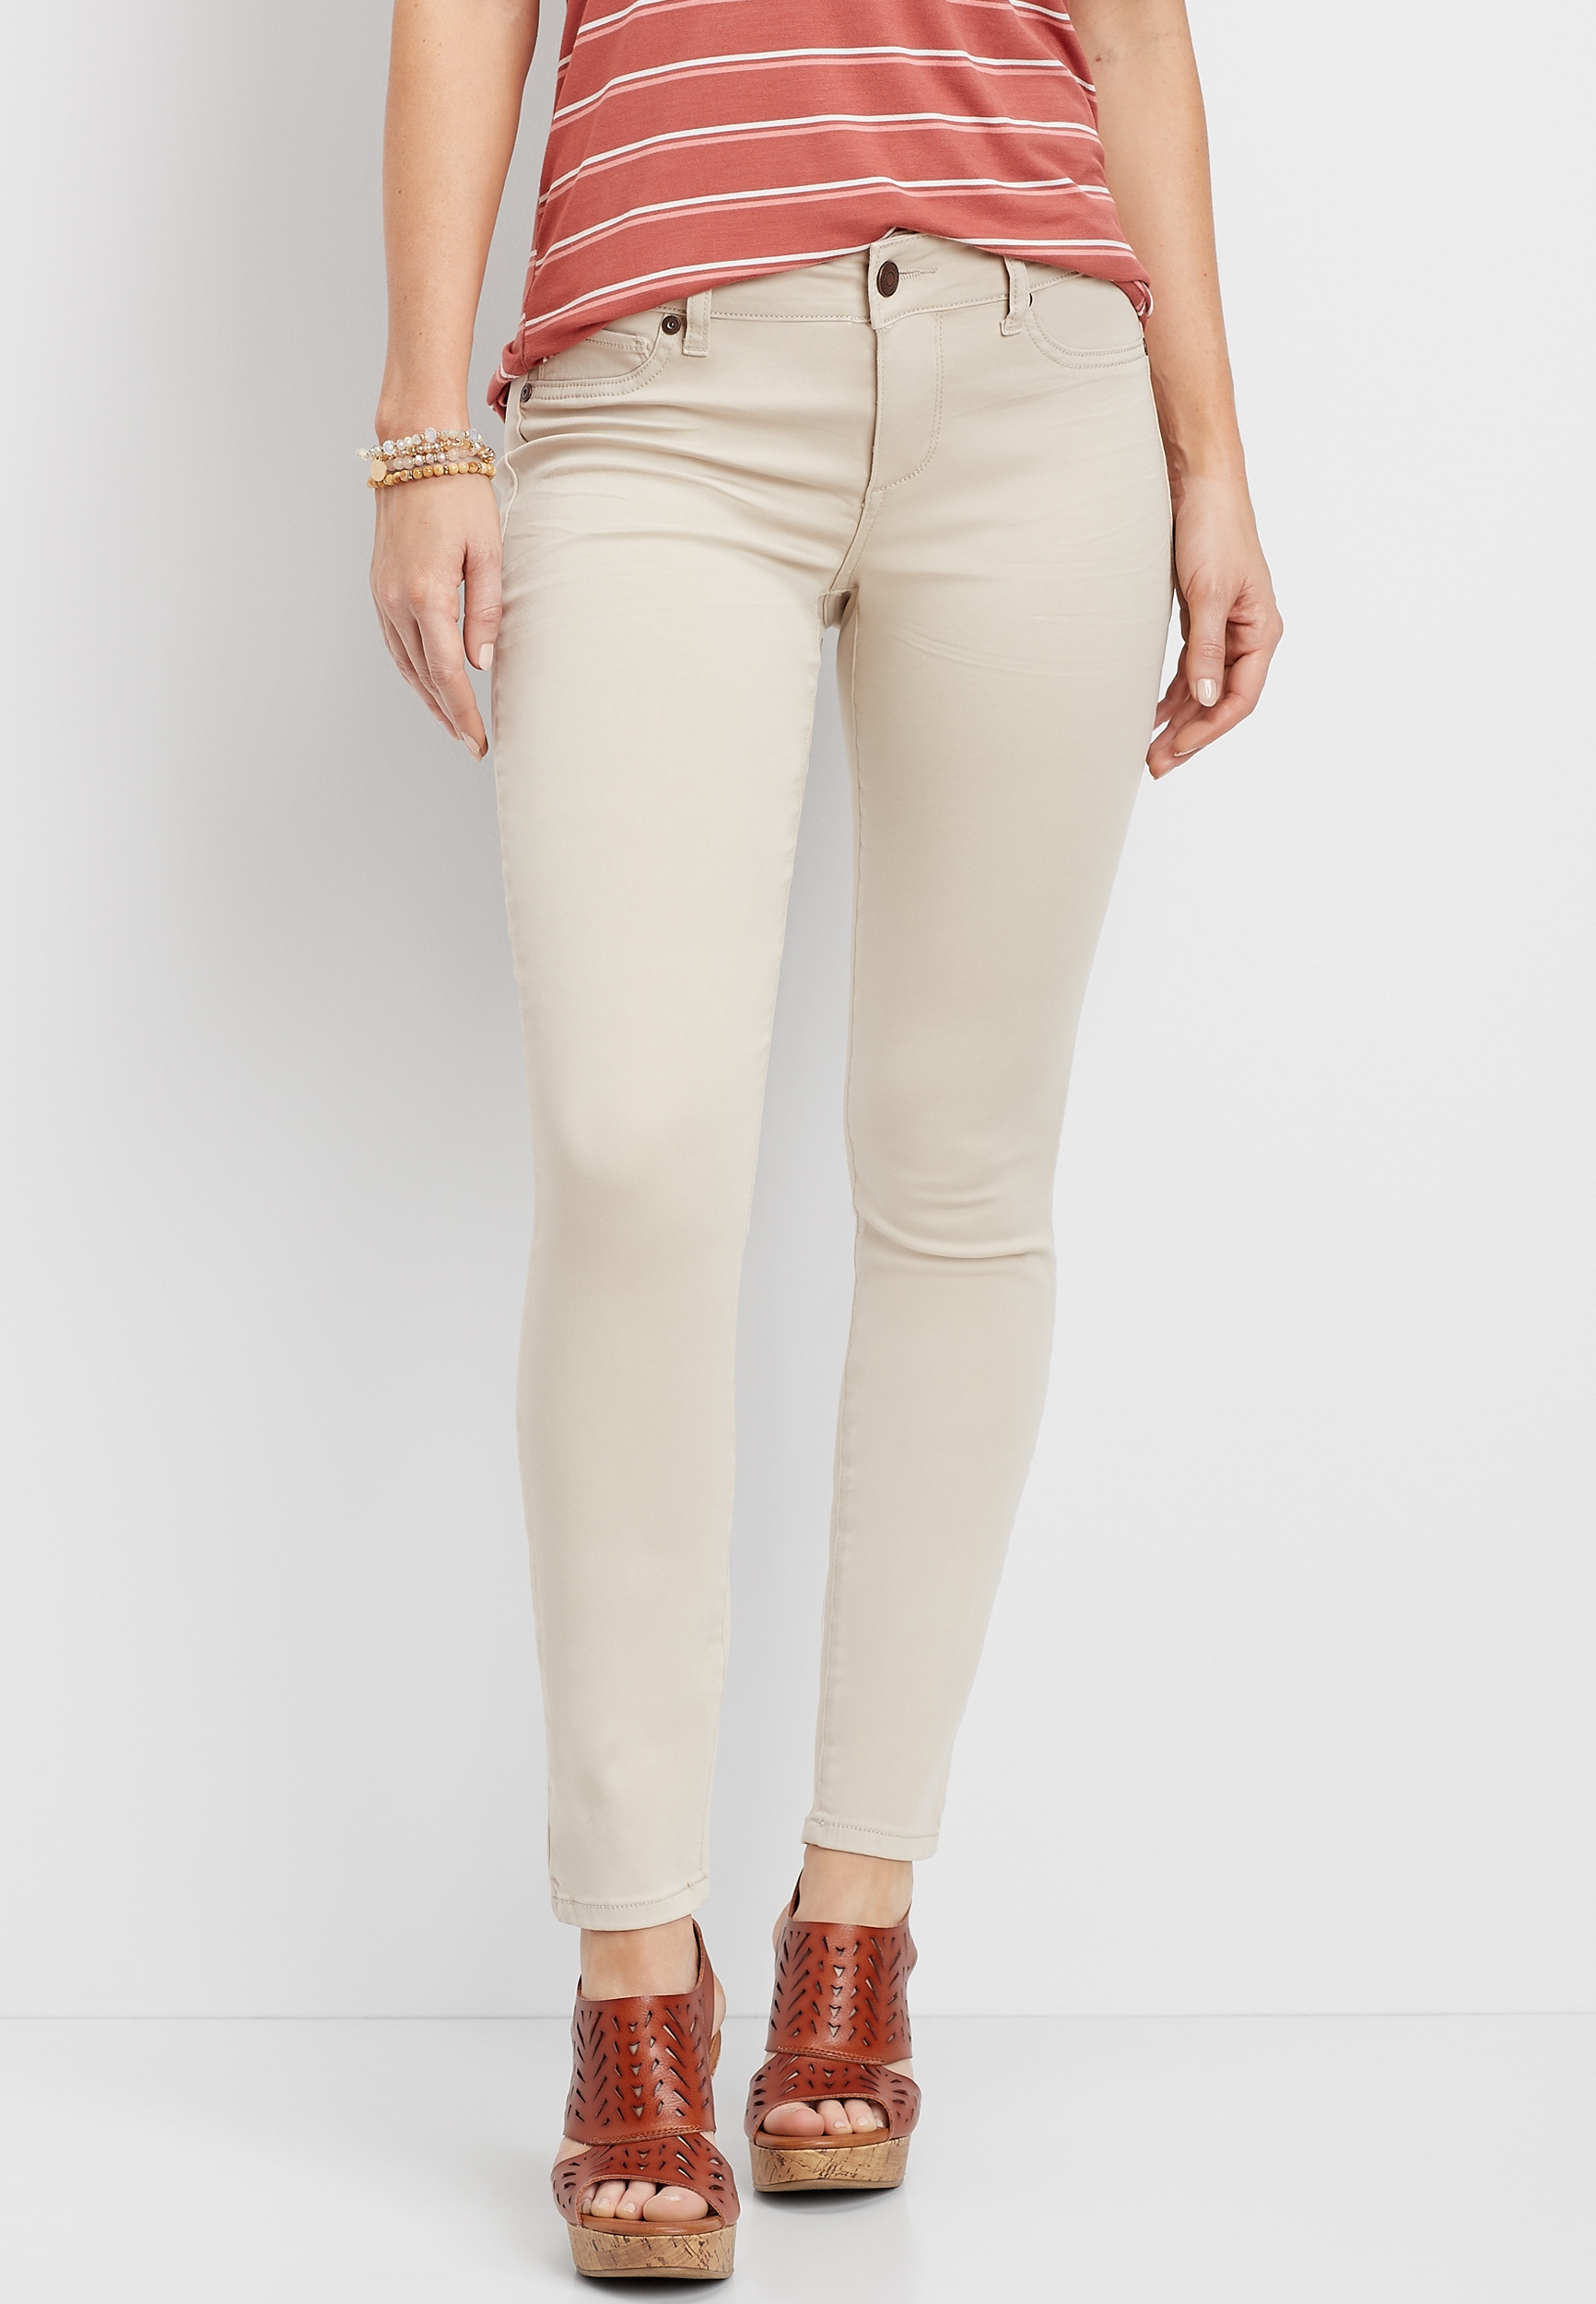 Khaki Color Jegging Made With REPREVE®